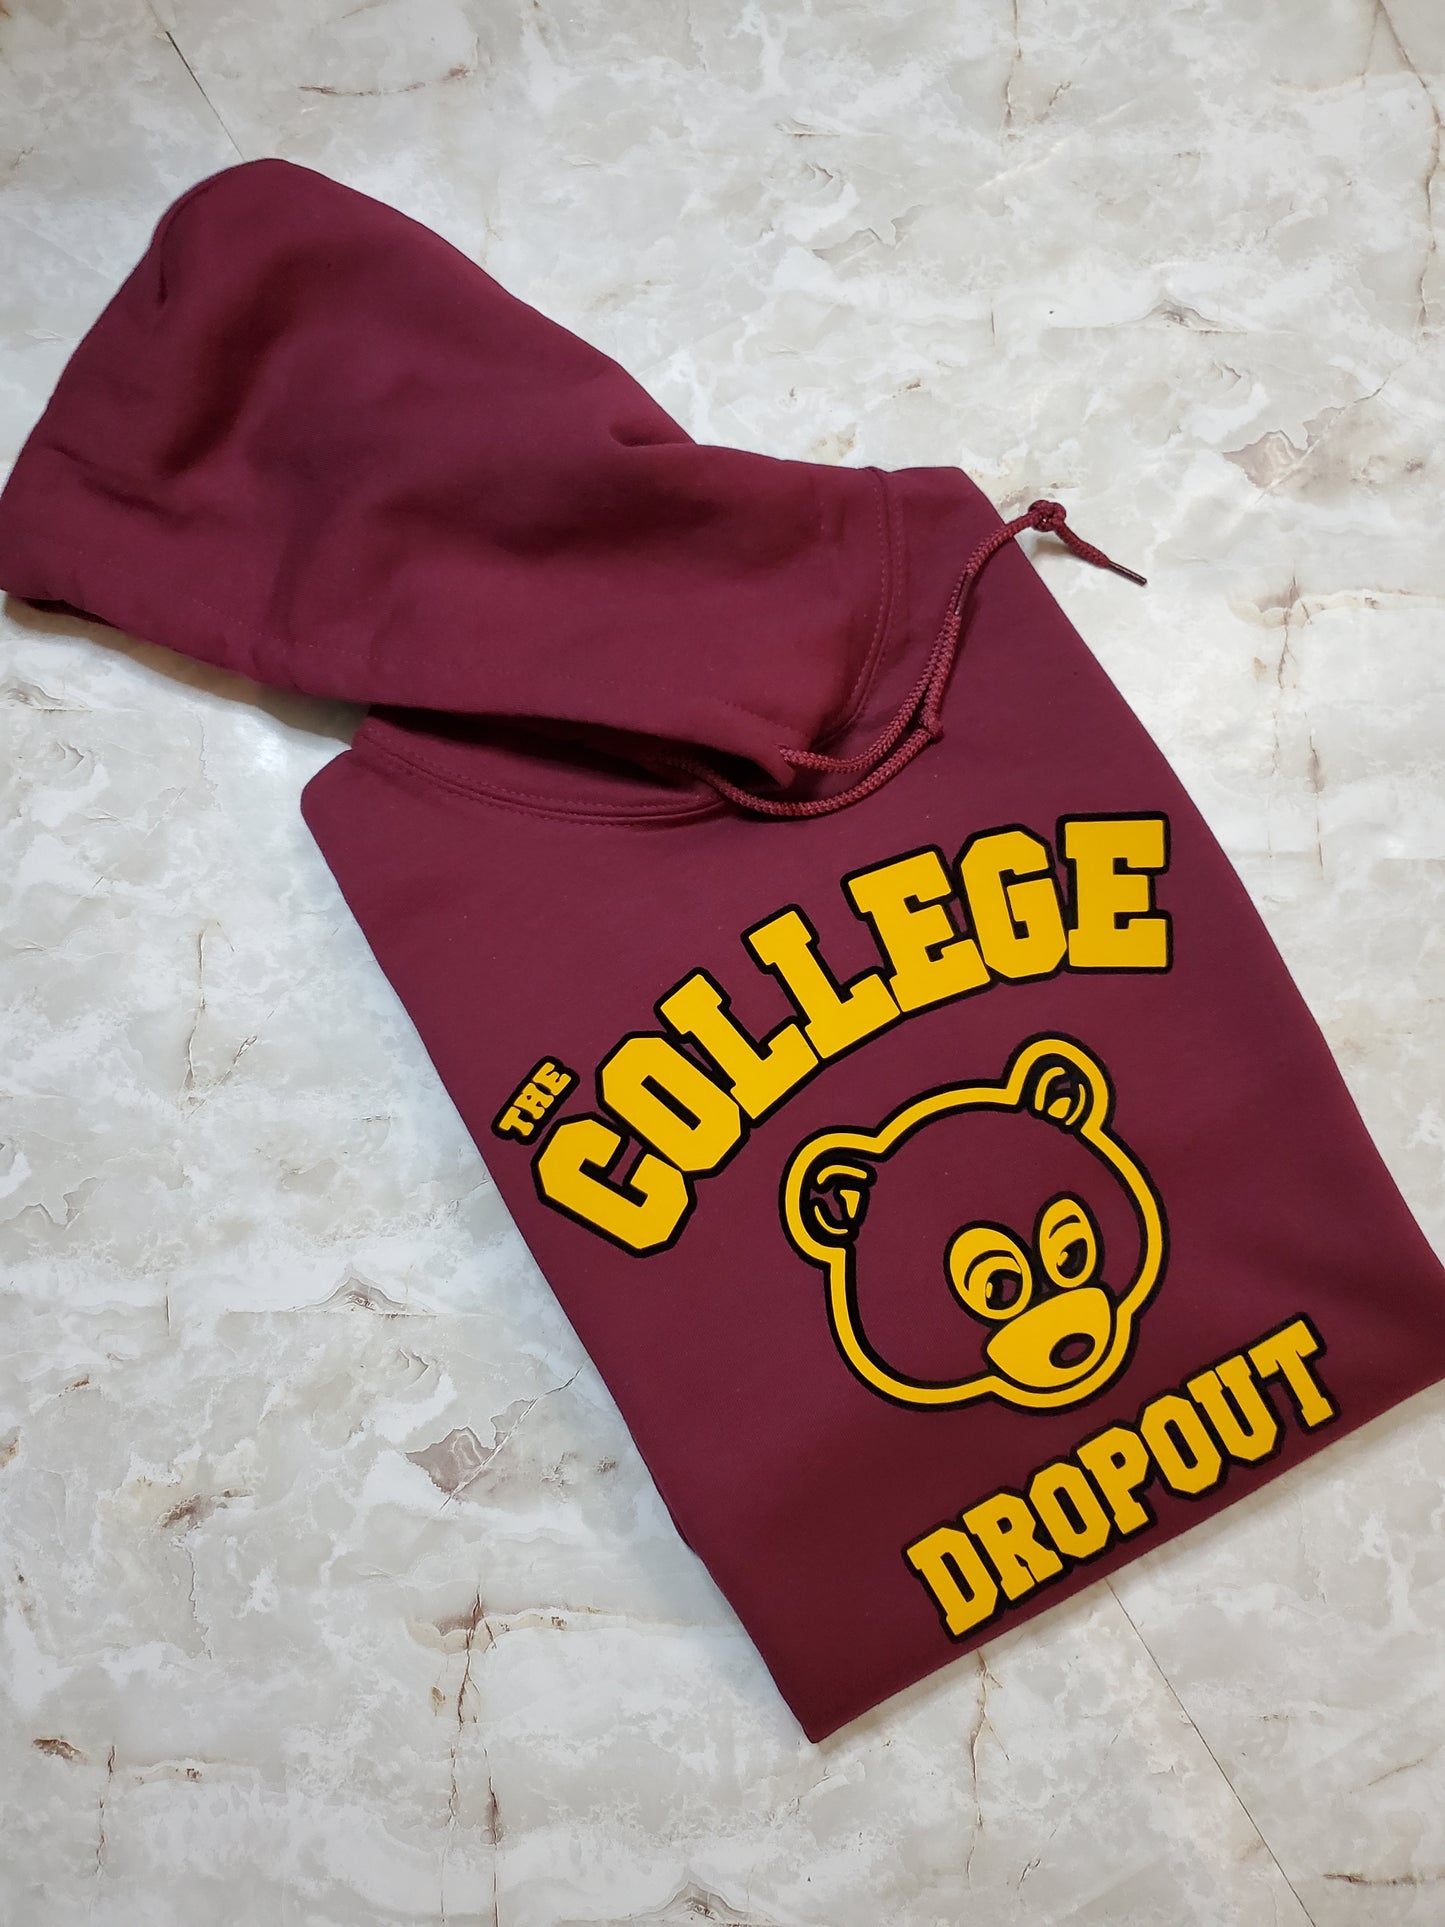 College Dropout Hoodie - Centre Ave Clothing Co.